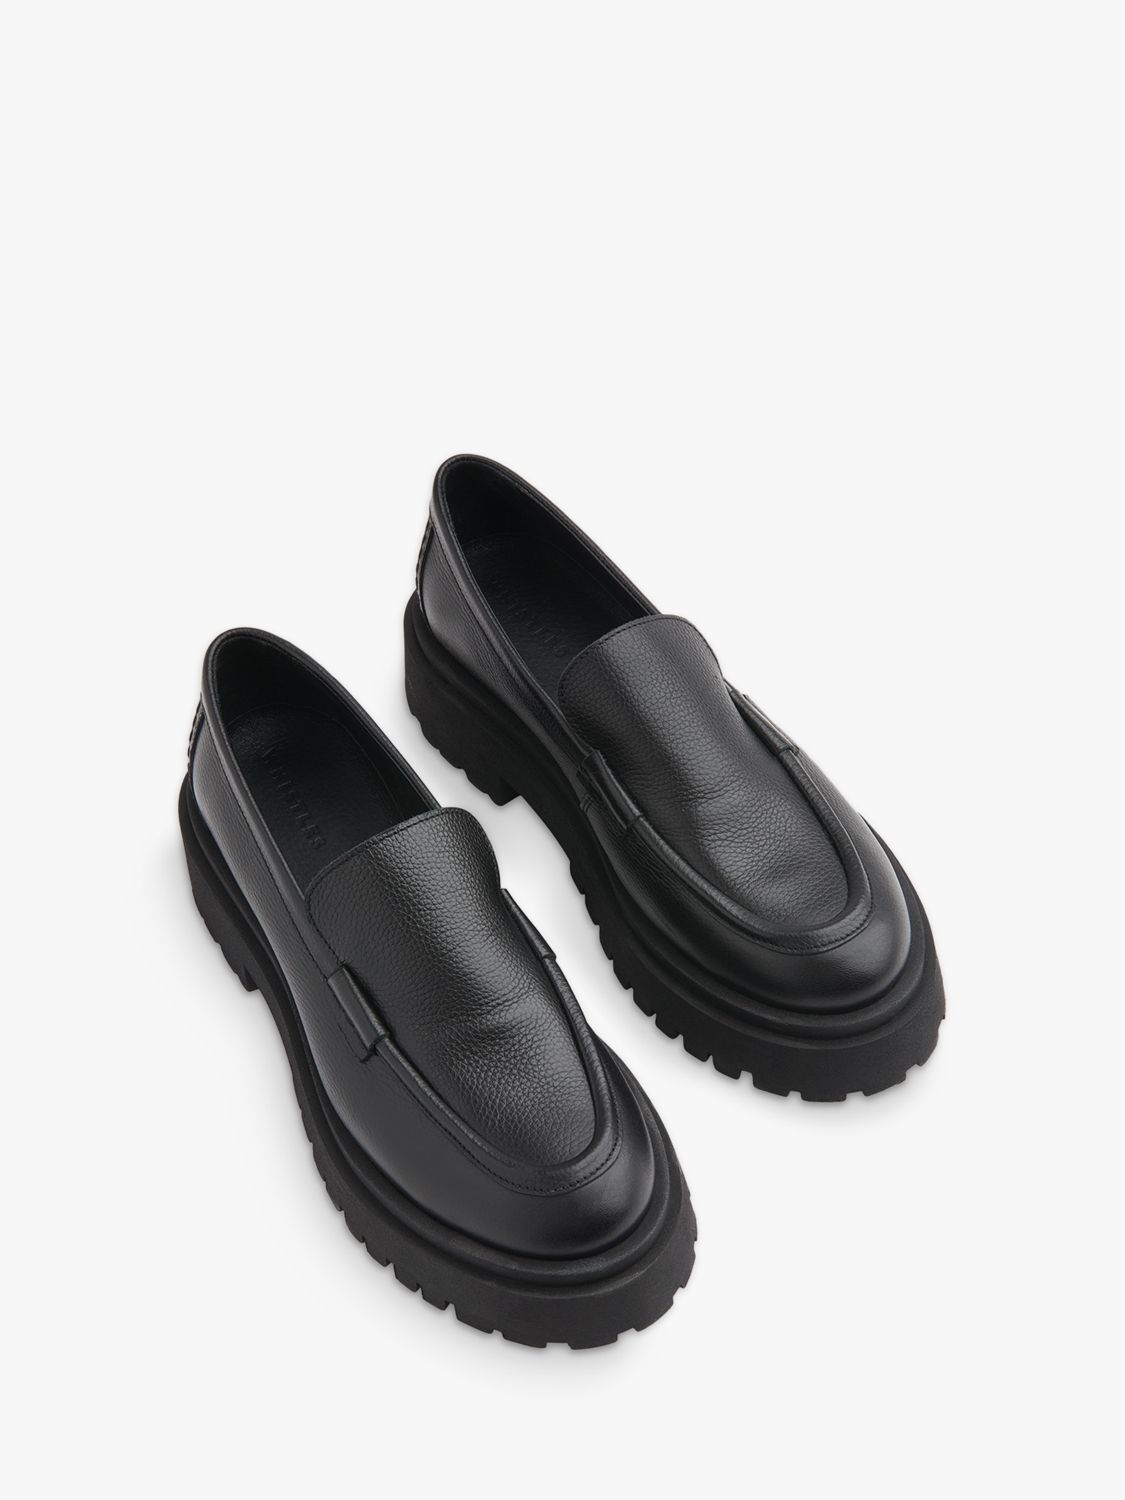 Whistles Aerton Leather Chunky Loafers, Black at John Lewis & Partners